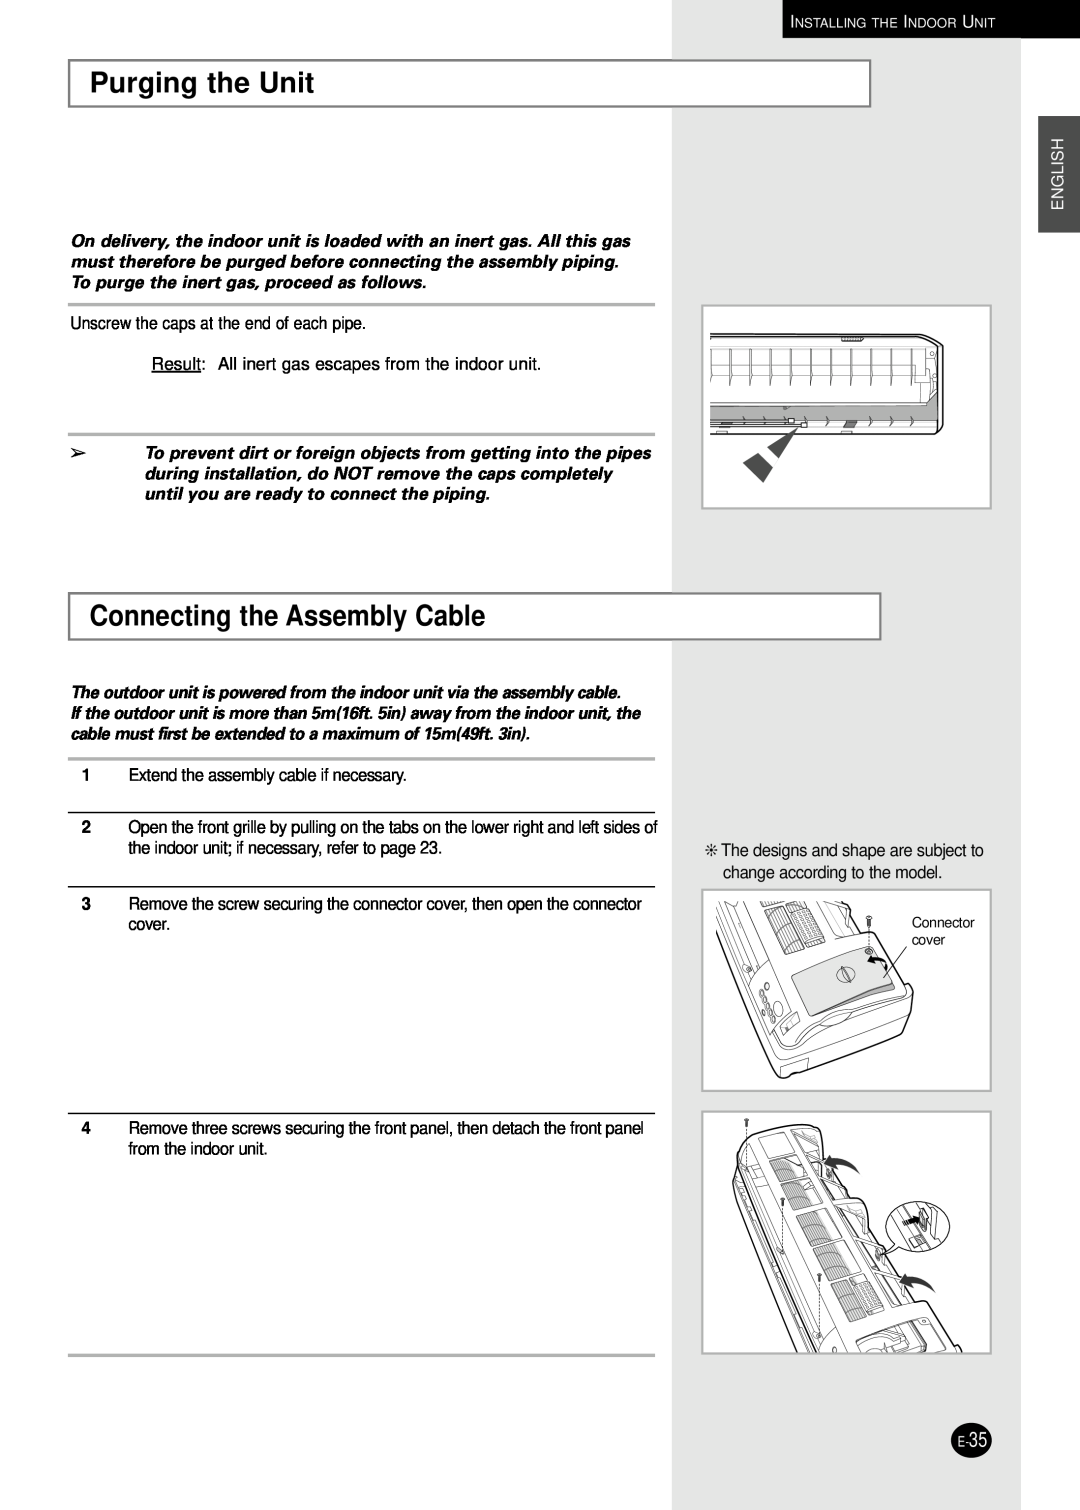 Samsung AD18B1C09 installation manual Purging the Unit, Connecting the Assembly Cable, English 